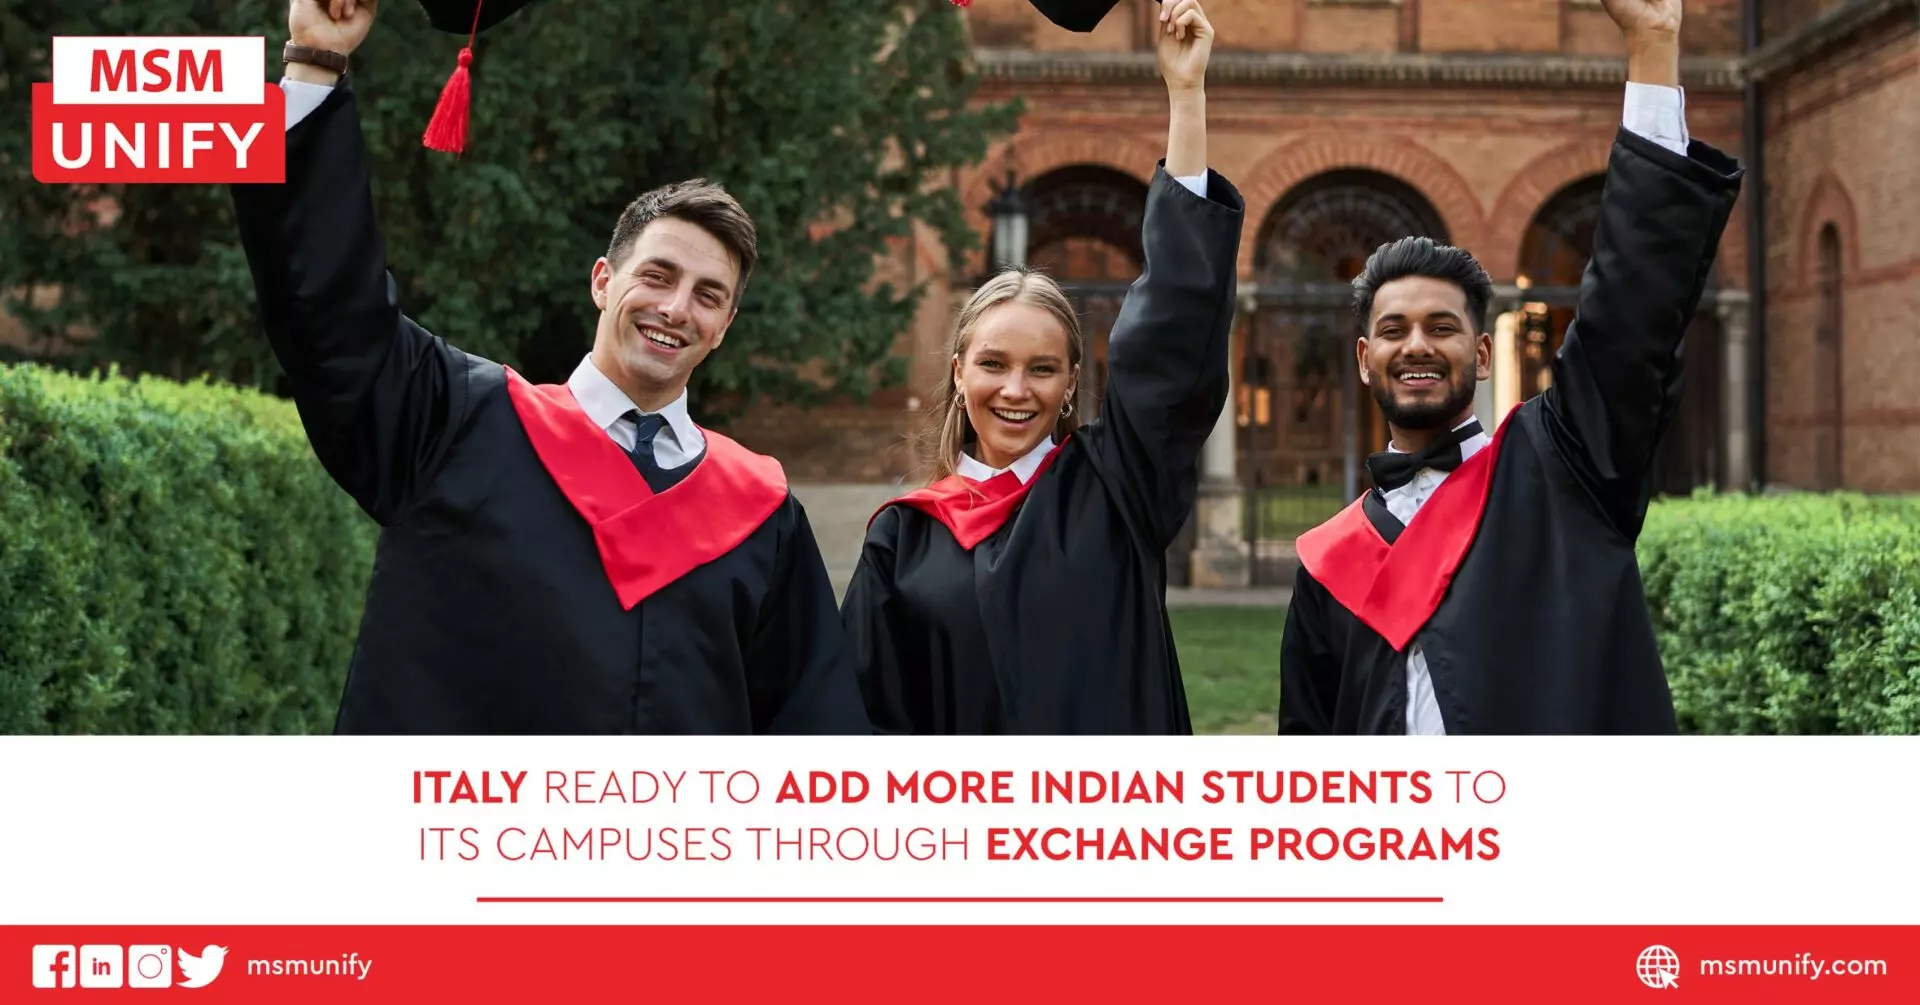 Italy Ready To Add More Indian Students to Its Campuses Through Exchange Programs scaled 1